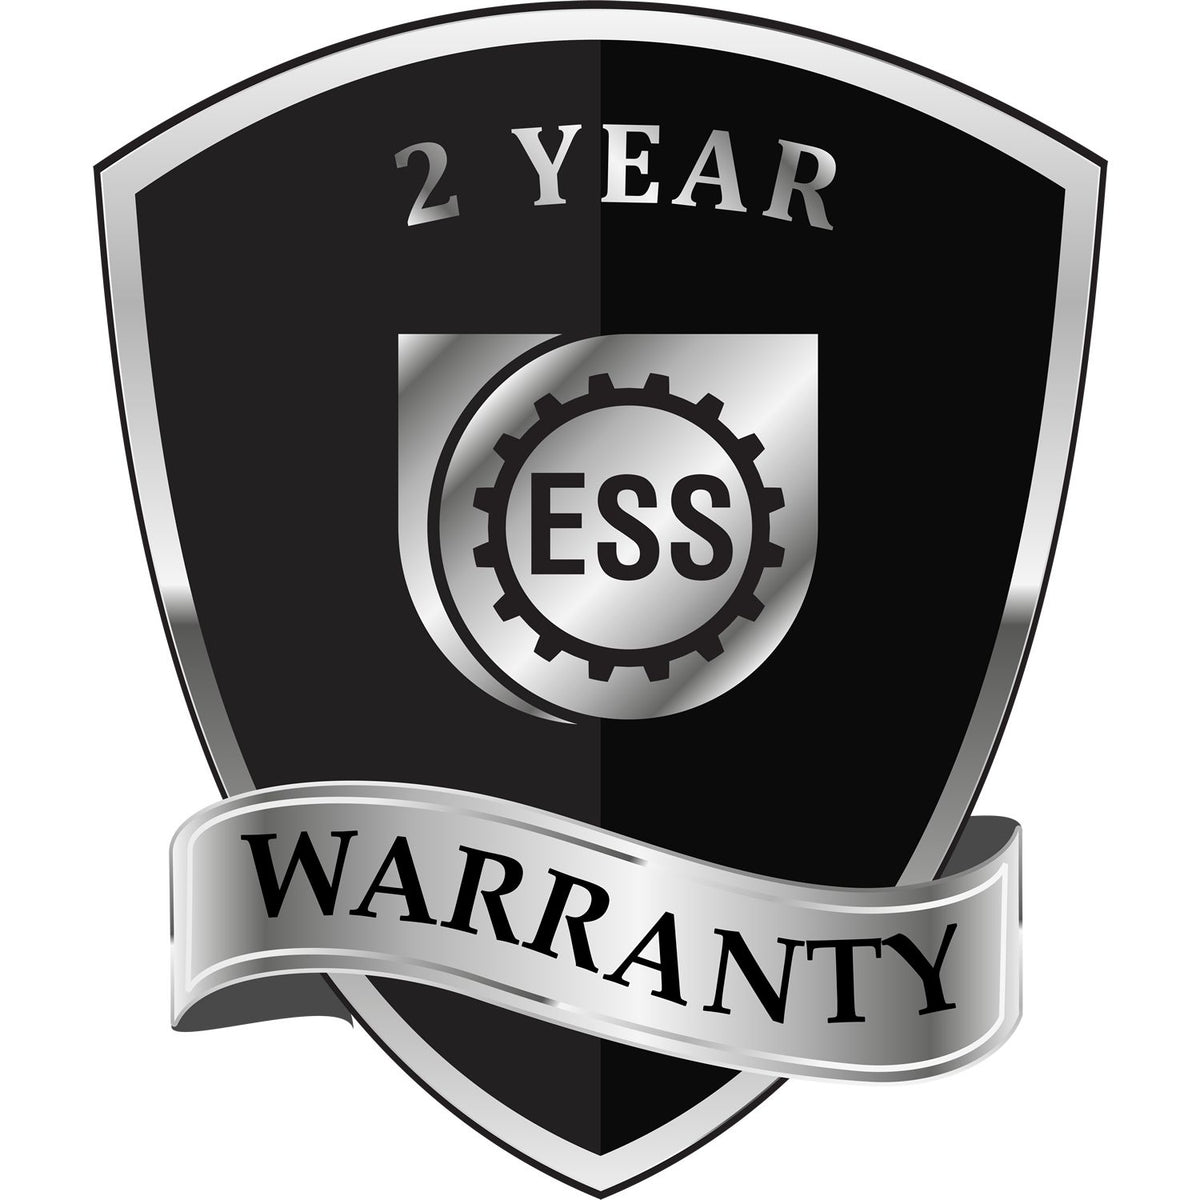 A badge or emblem showing a warranty icon for the State of Massachusetts Extended Long Reach Engineer Seal